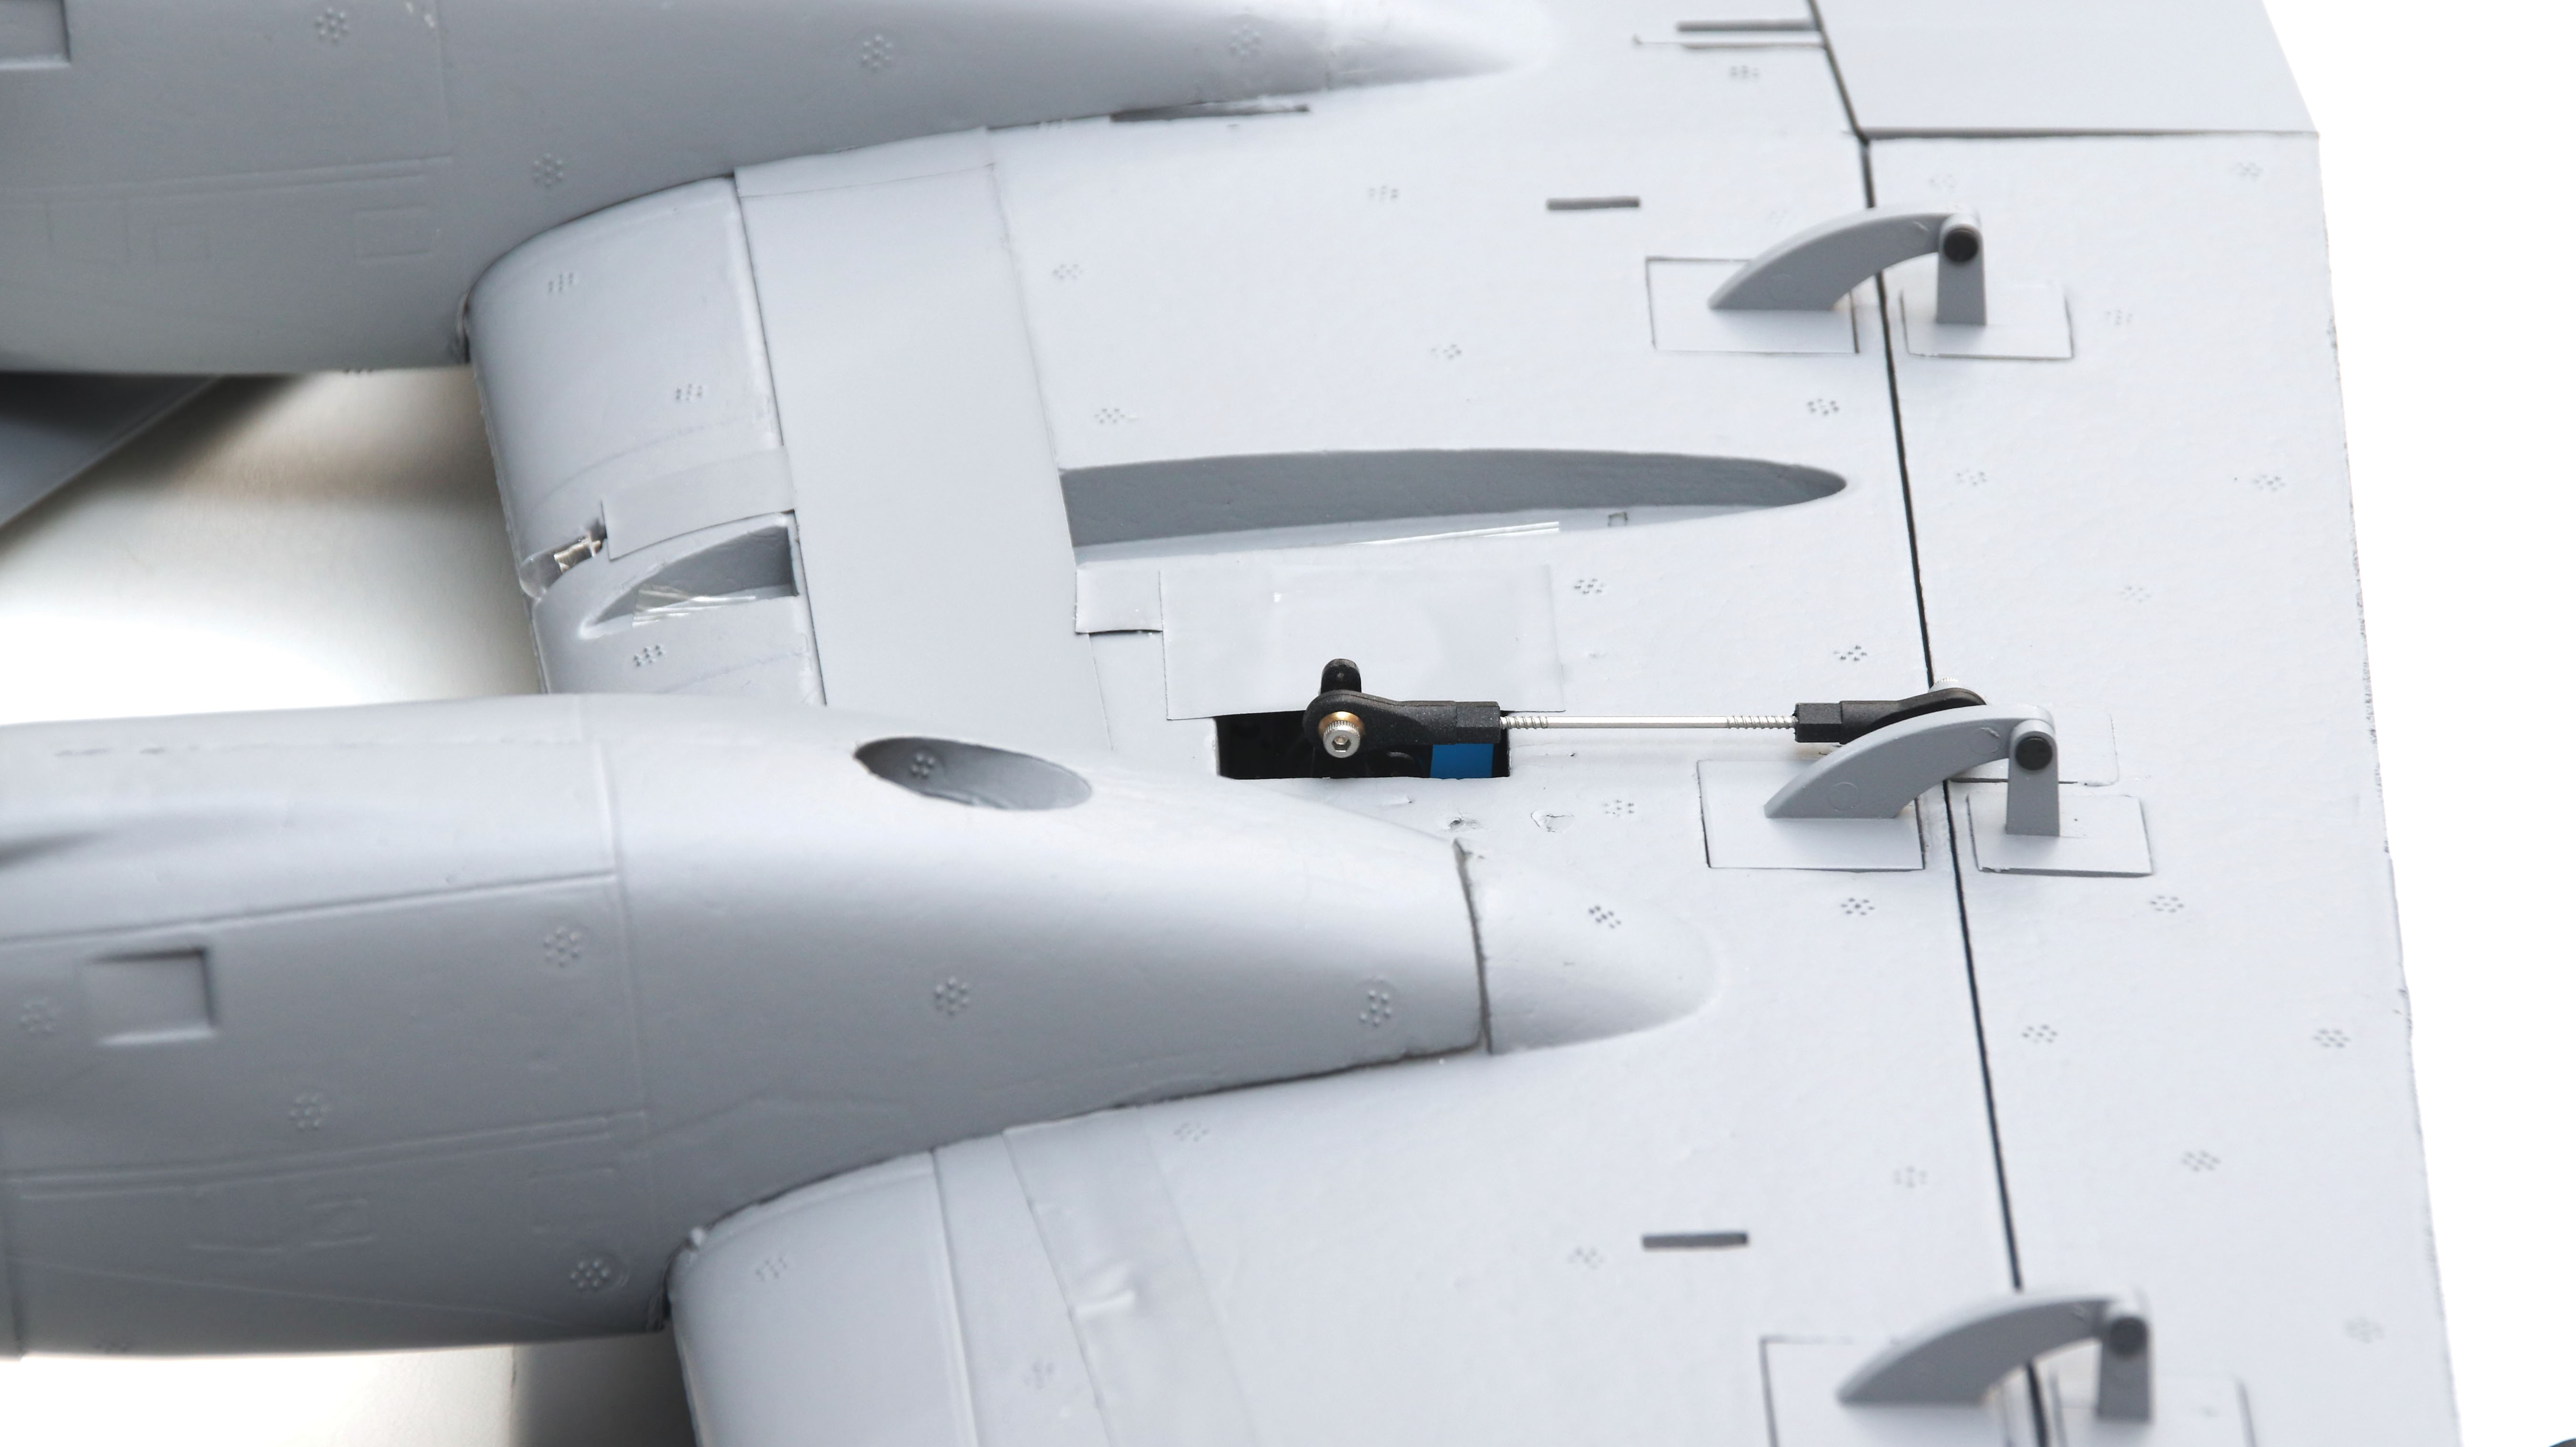 the long slender c 130 wing comes equipped